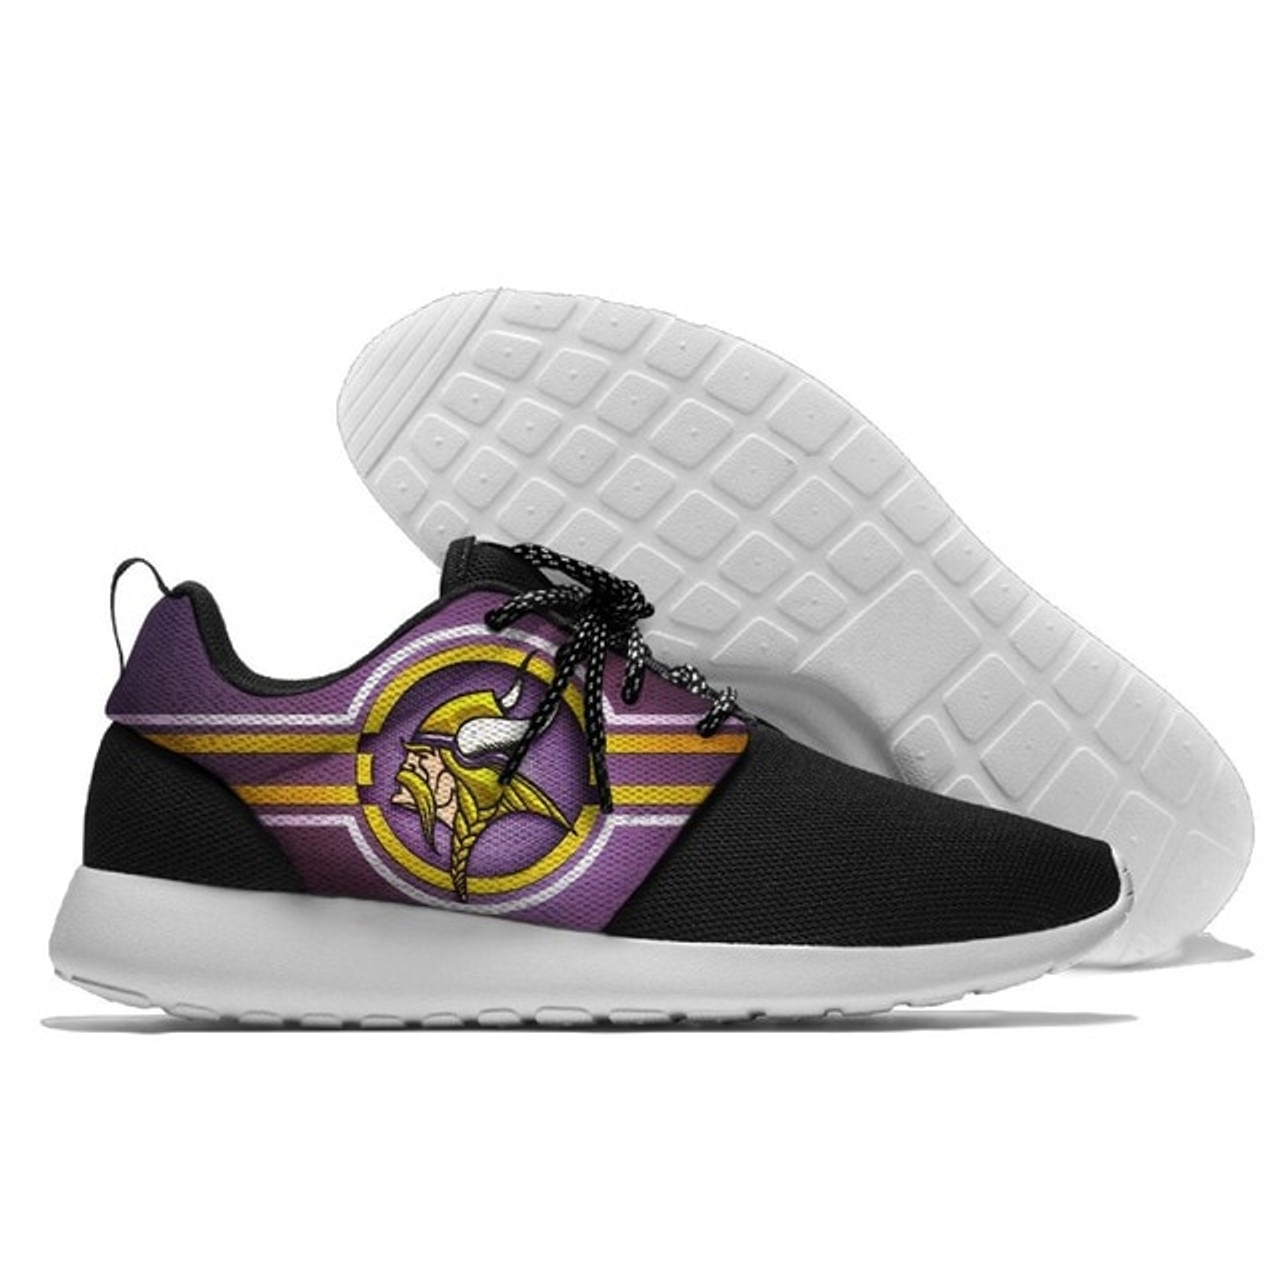 **(NEW-OFFICIALLY-LICENSED-N.F.L.MINNESOTA-VIKINGS-RUNNING-SHOES,MENS-OR-WOMENS-ROSHE-STYLE,LIGHT-WEIGHT-SPORT-PREMIUM-RUNNING-SHOES,WITH-OFFICIAL-VIKINGS-TEAM-COLORS & VIKINGS-TEAM-LOGOS,SPECIAL-CUSHIONED-COMFORT-INSOLES/COMES-IN-ALL-SIZES:)**